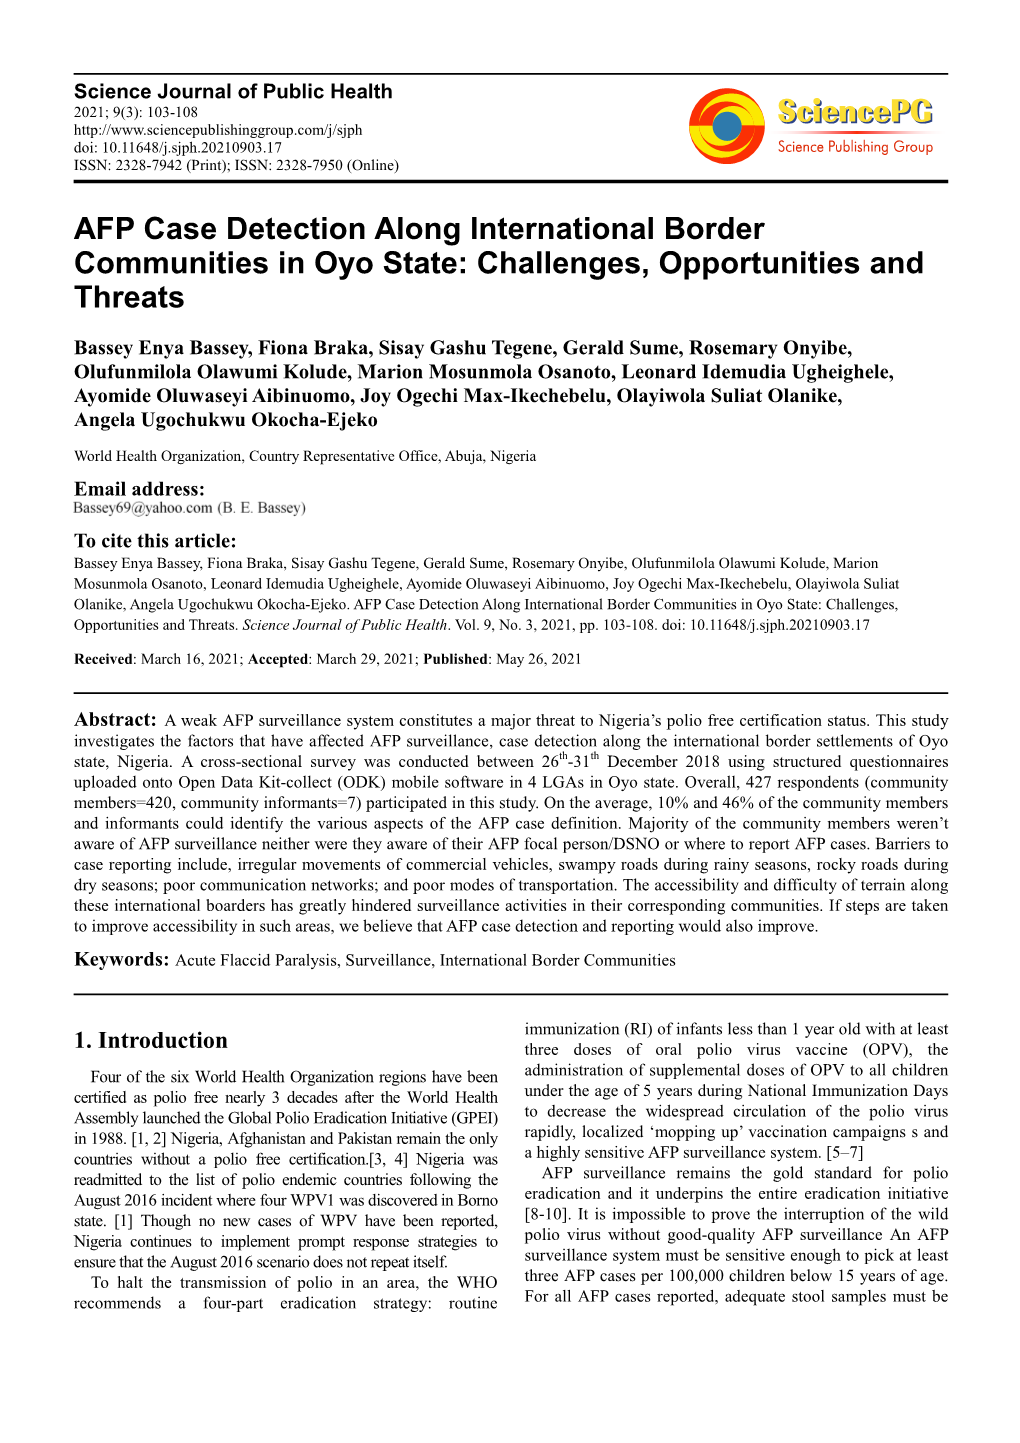 AFP Case Detection Along International Border Communities in Oyo State: Challenges, Opportunities and Threats